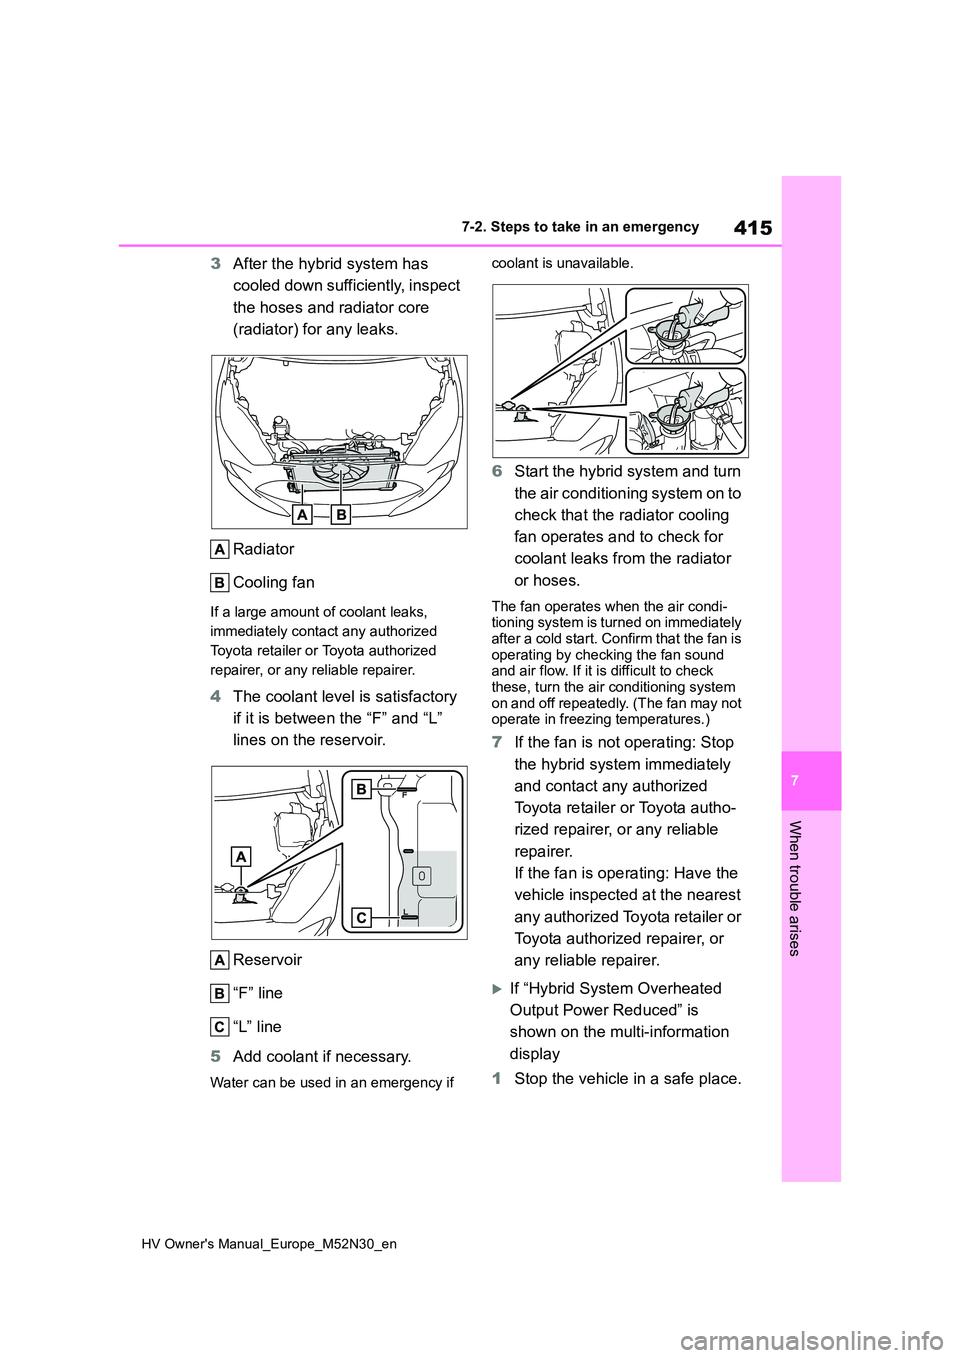 TOYOTA YARIS 2022 Owners Manual 415
7
HV Owner's Manual_Europe_M52N30_en
7-2. Steps to take in an emergency
When trouble arises
3After the hybrid system has  
cooled down sufficiently, inspect  
the hoses and radiator core  
(ra